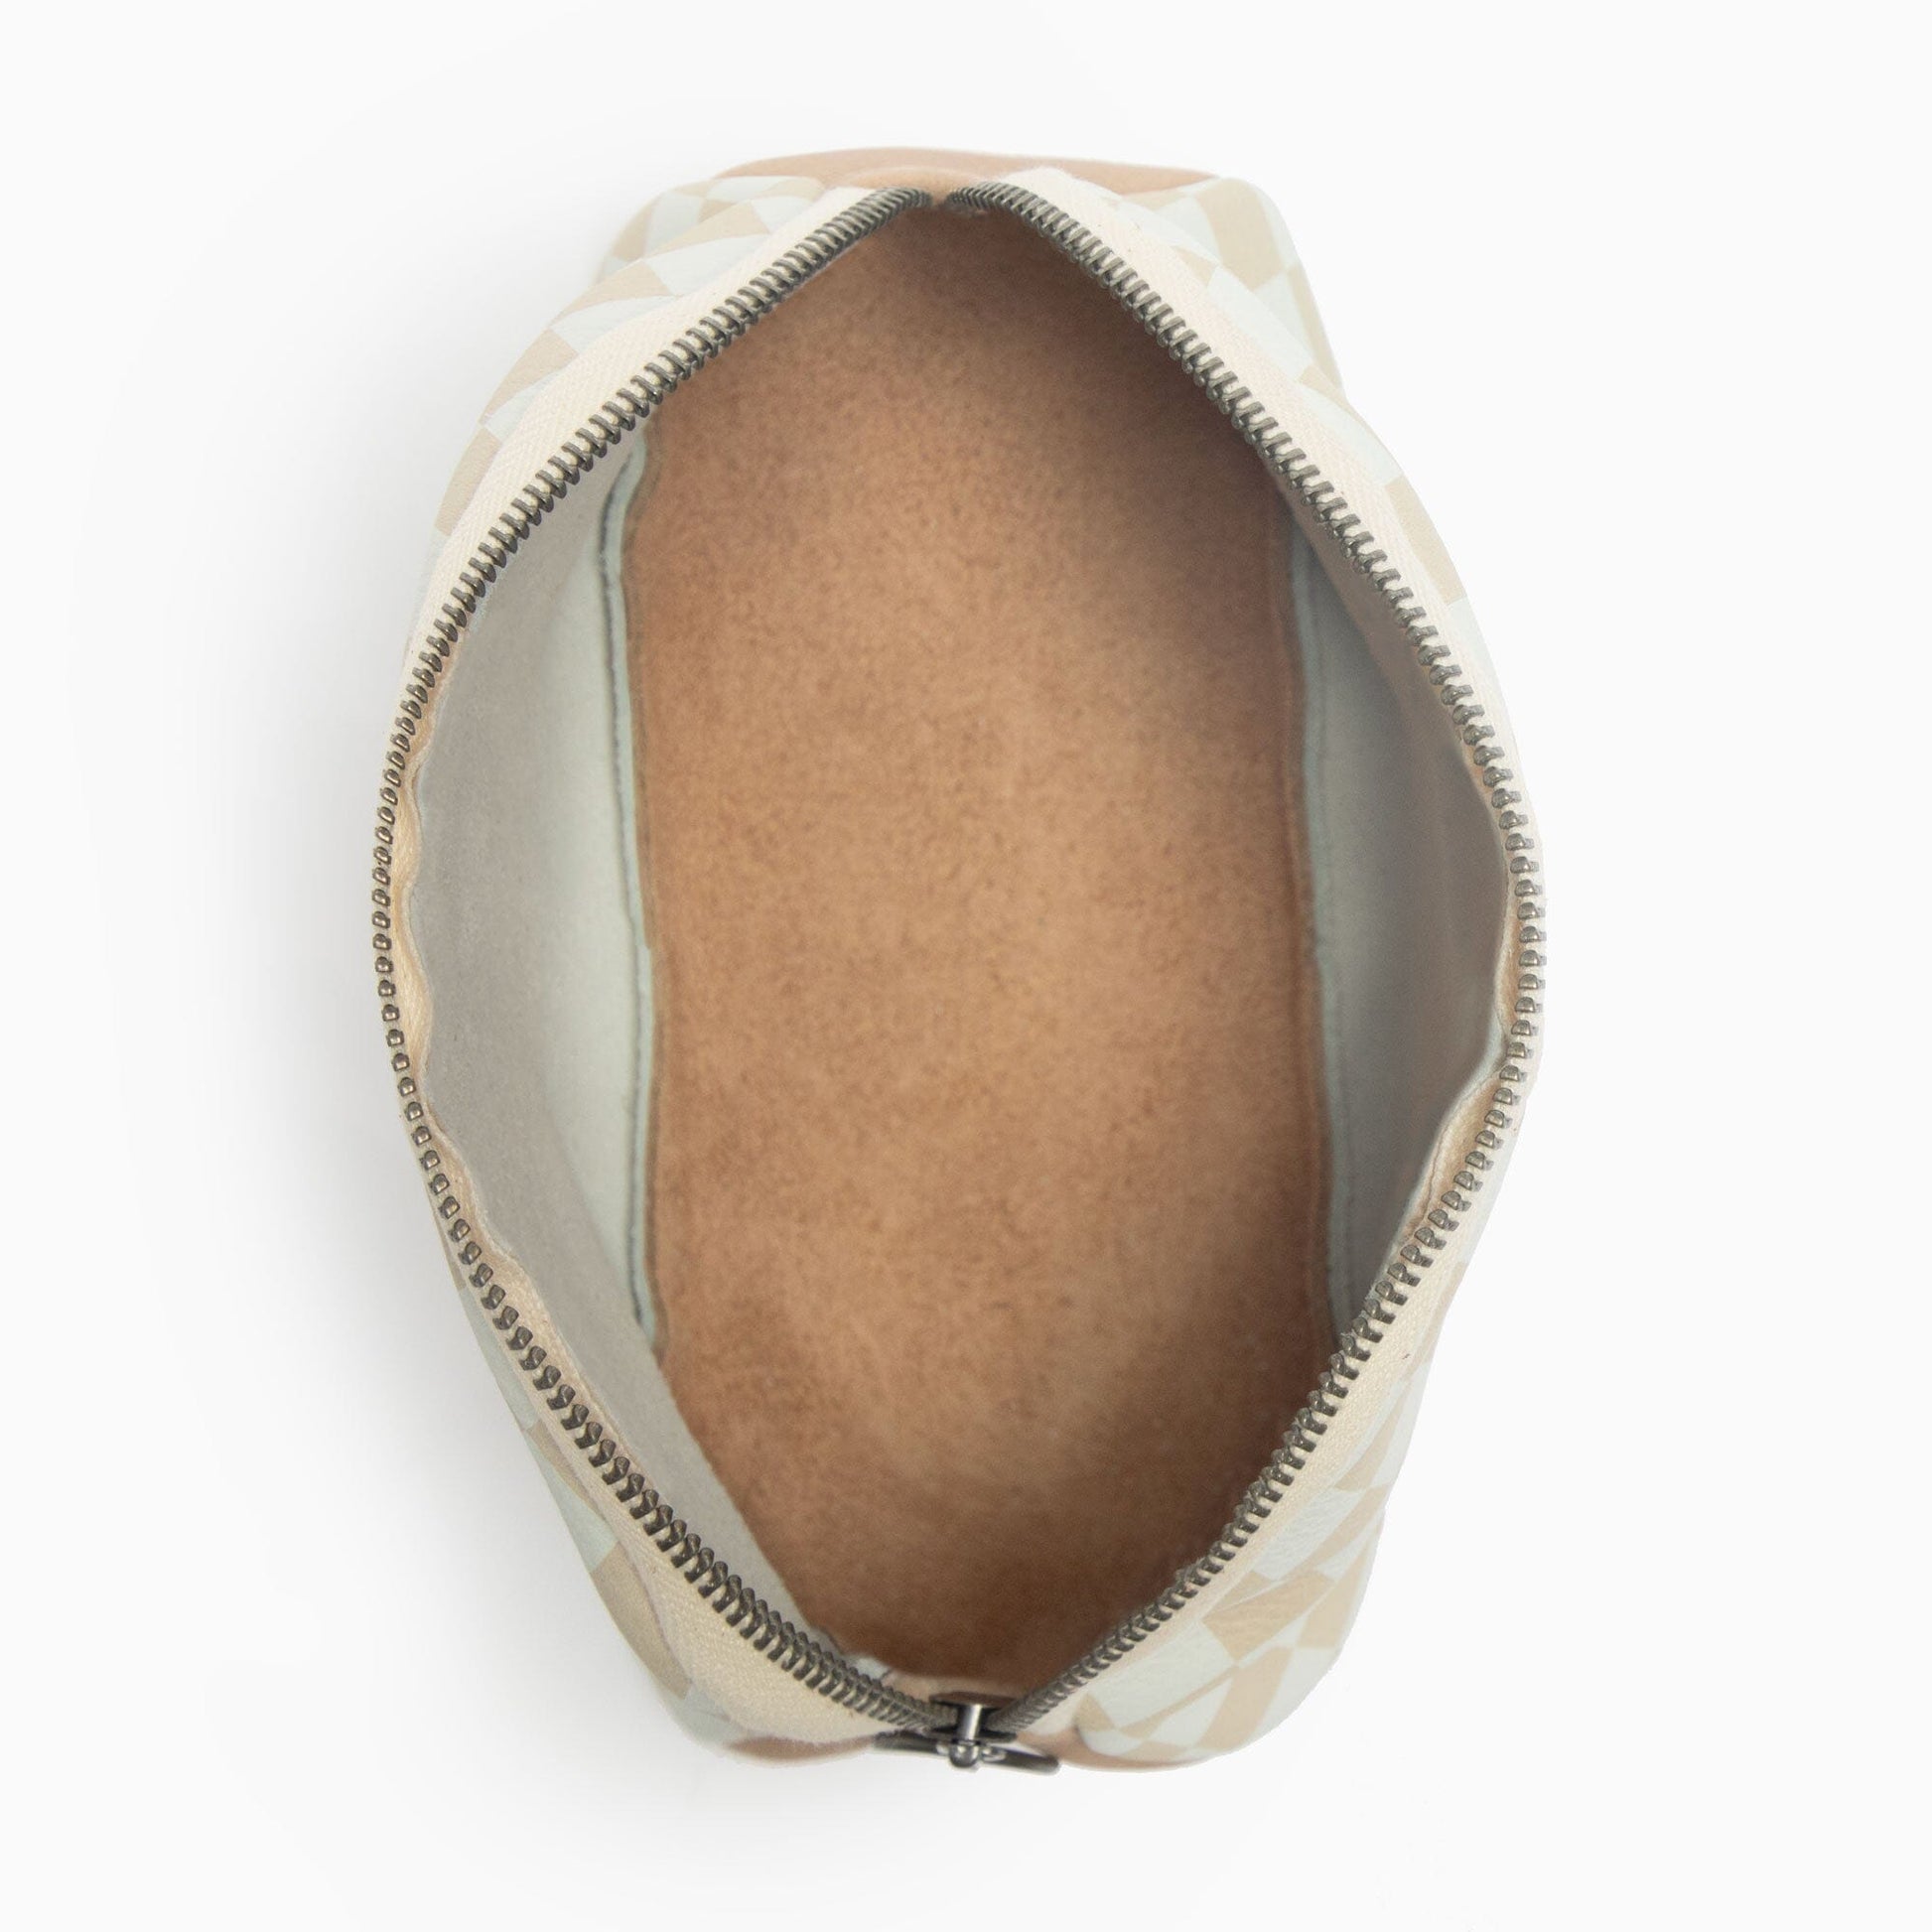 Trendy Tan Check Cosmetic Pouch – Freshly Picked